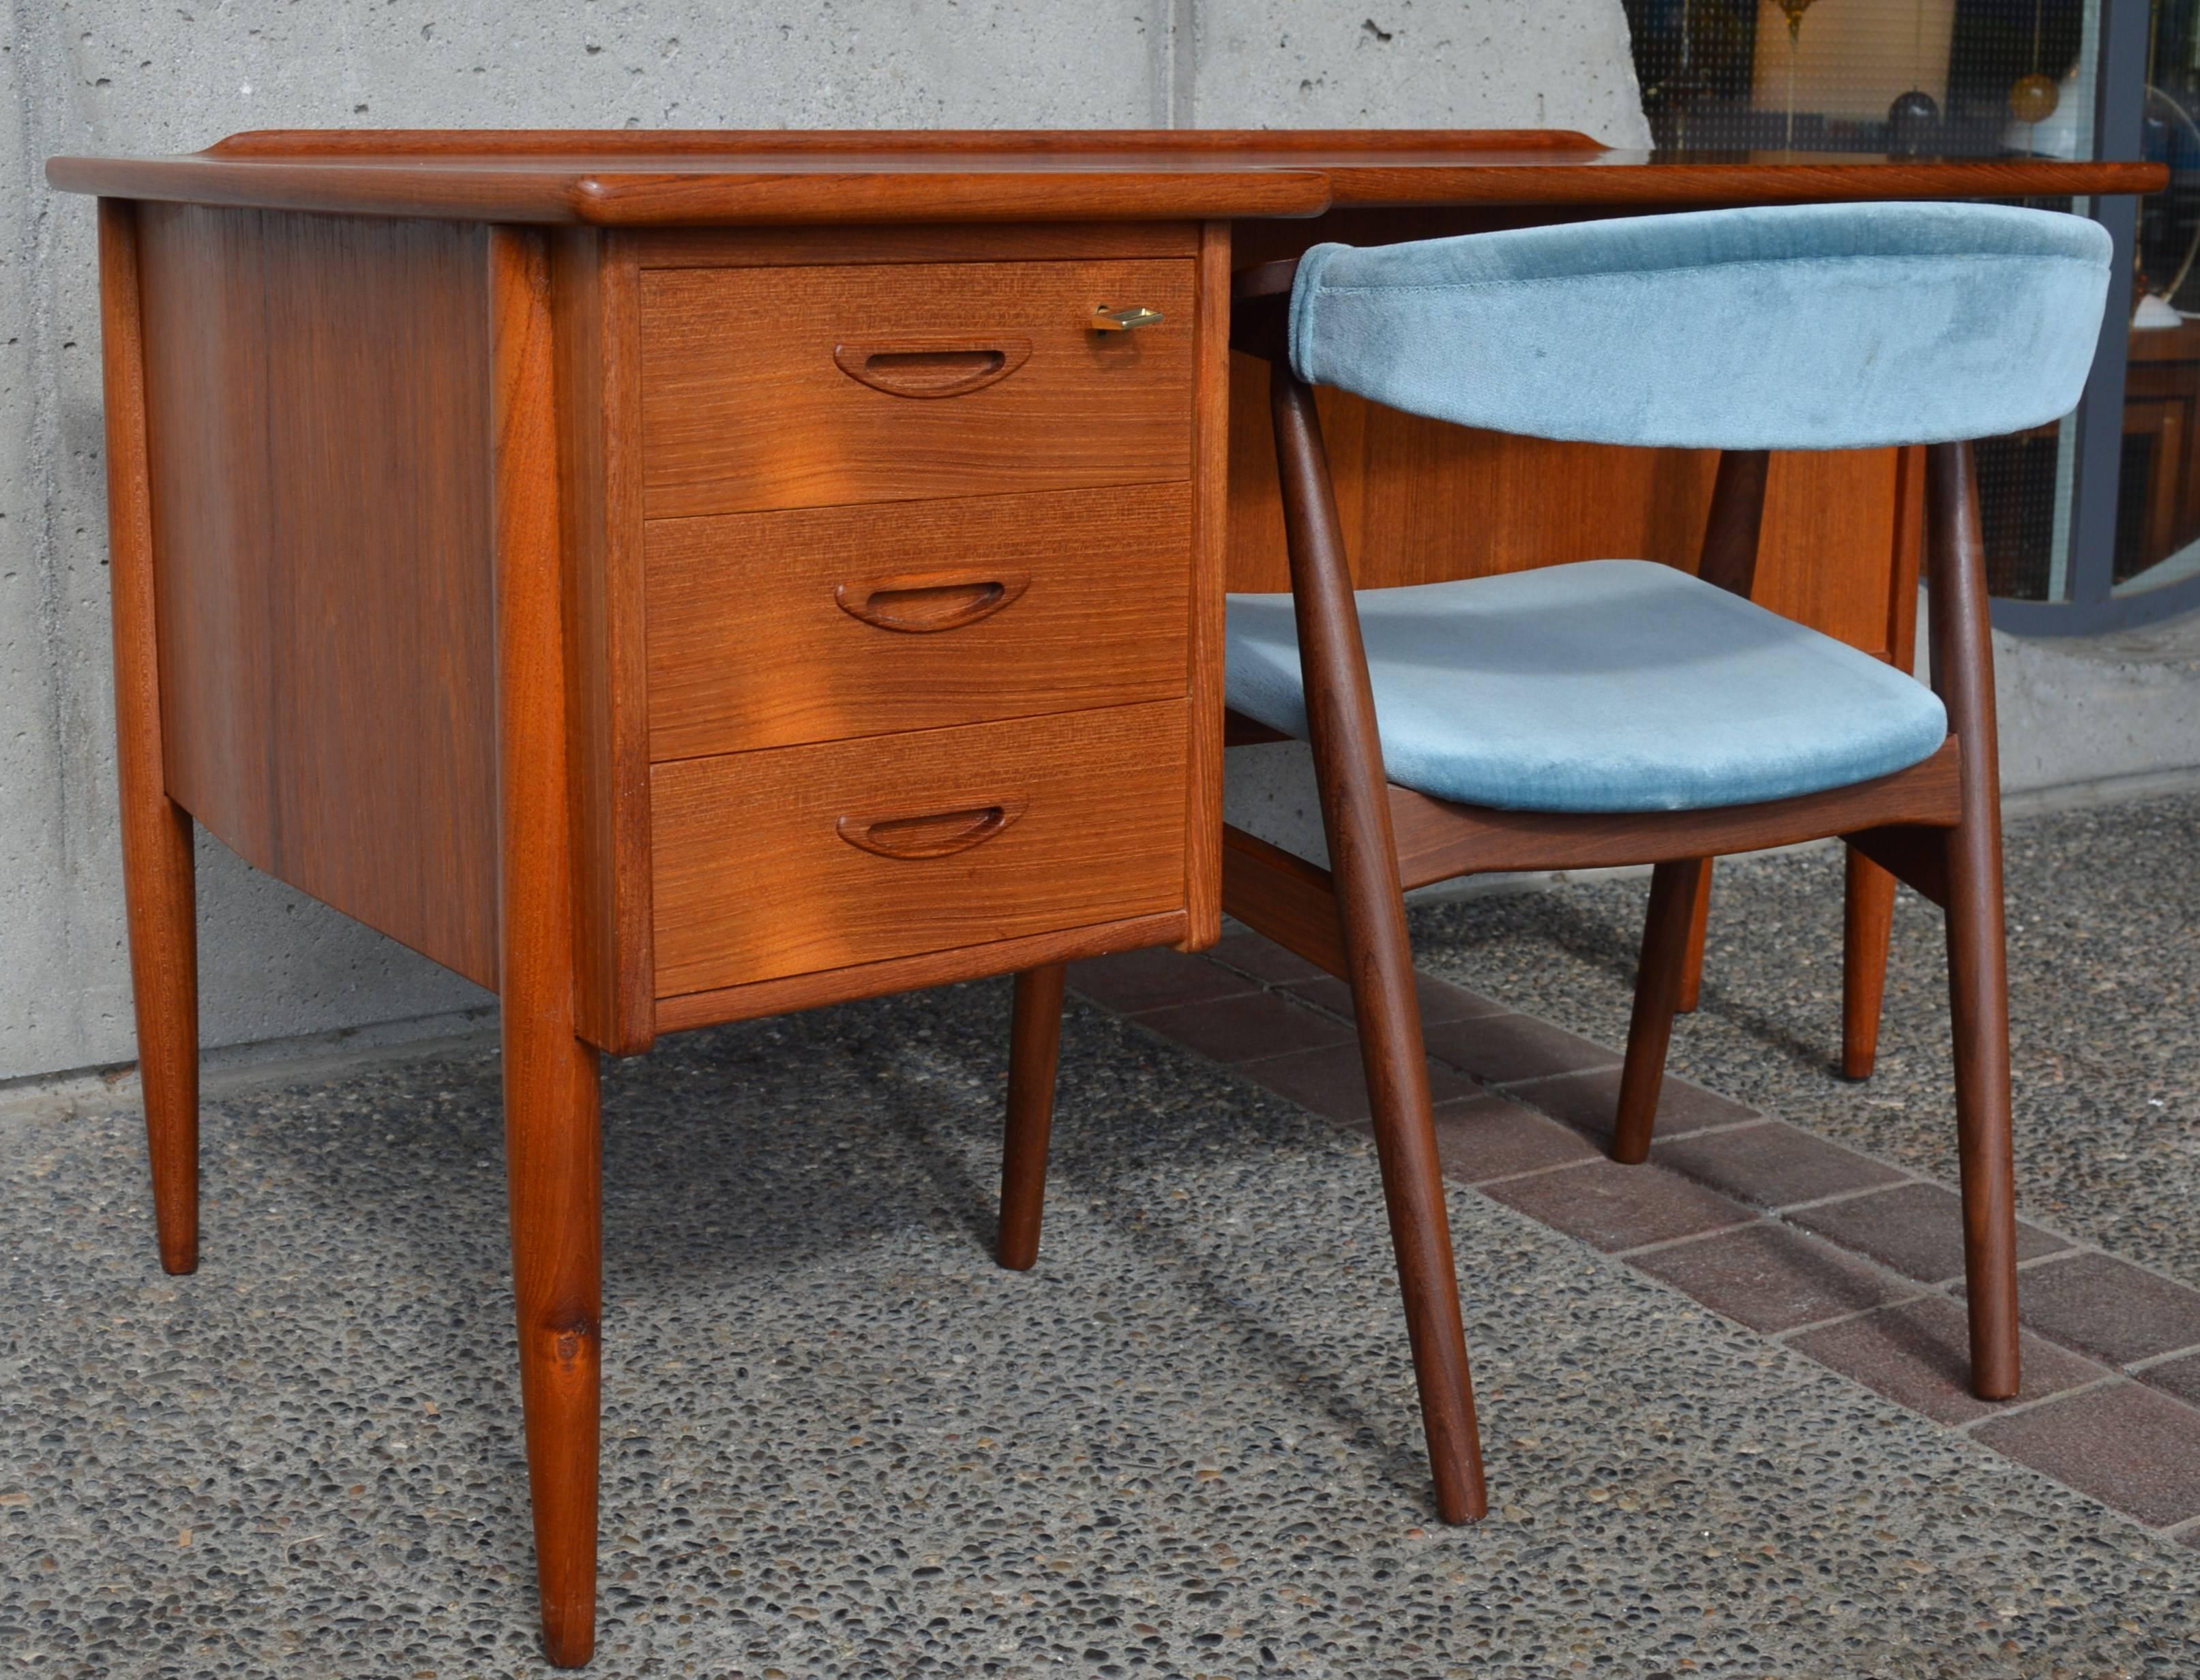 Mid-20th Century Teak Paisley Desk by Goran Strand for Lelangs, Back Display and Bar, Sweden